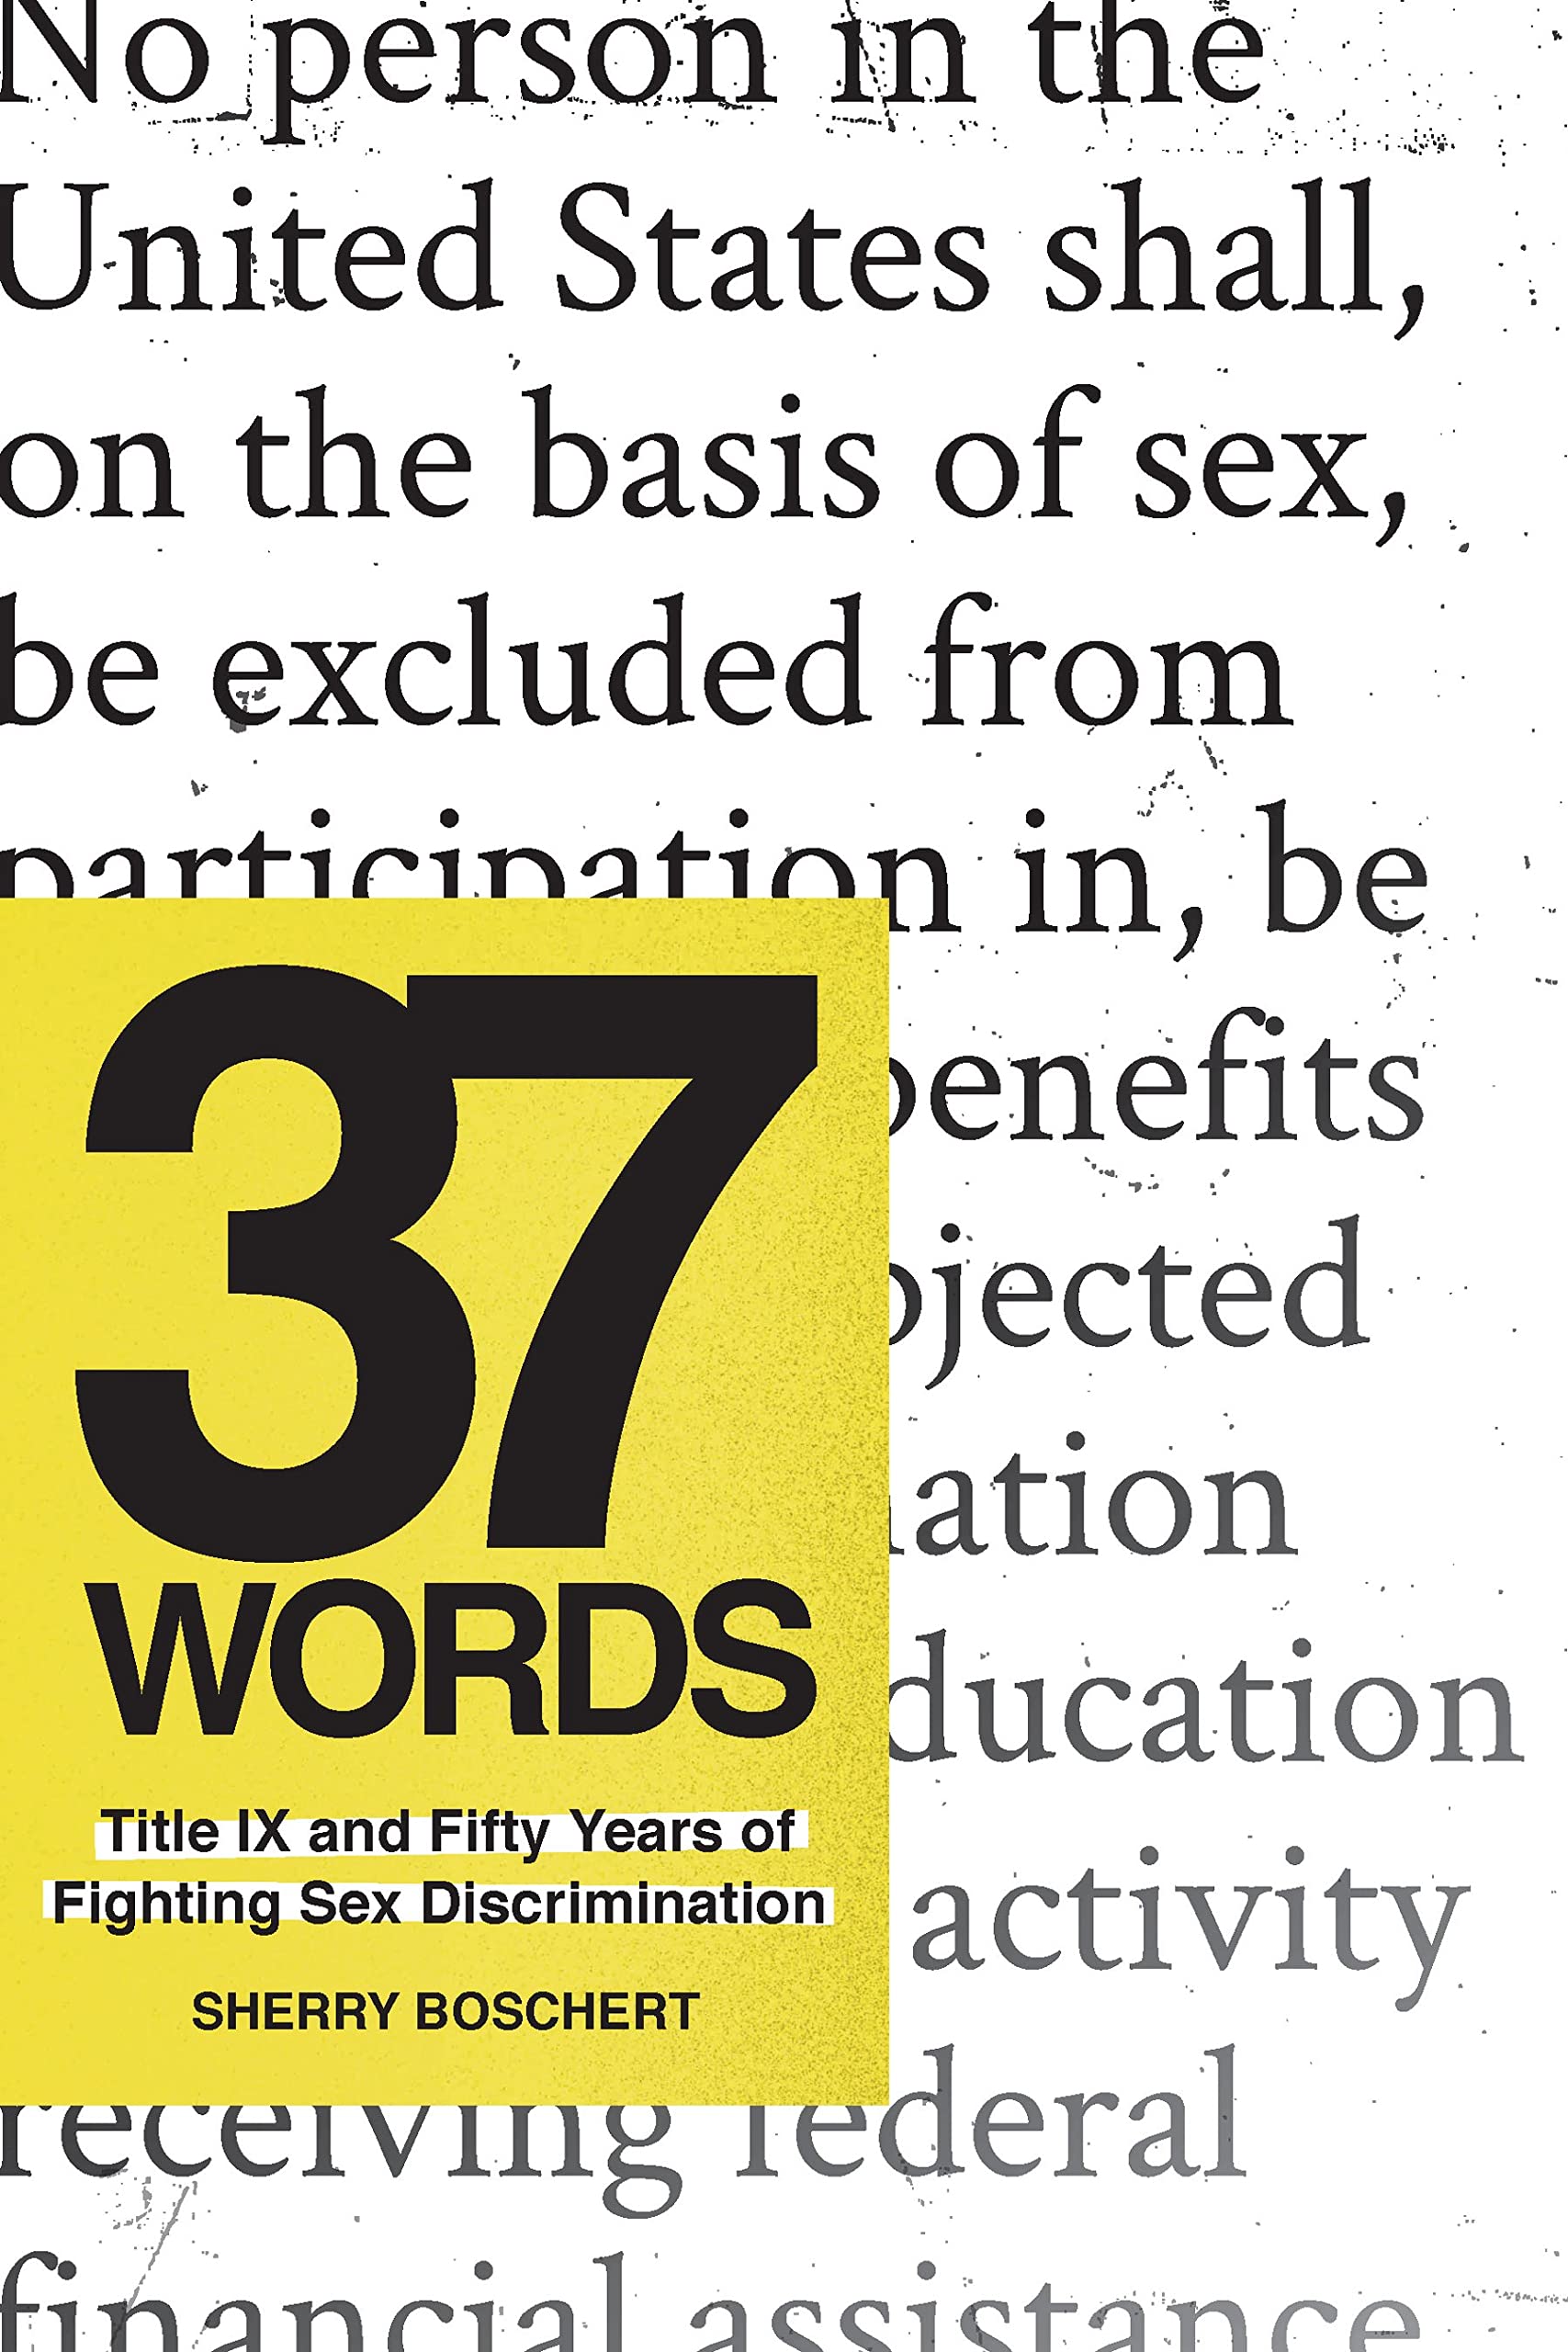 37 words : Title IX and fifty years of fighting sex discrimination